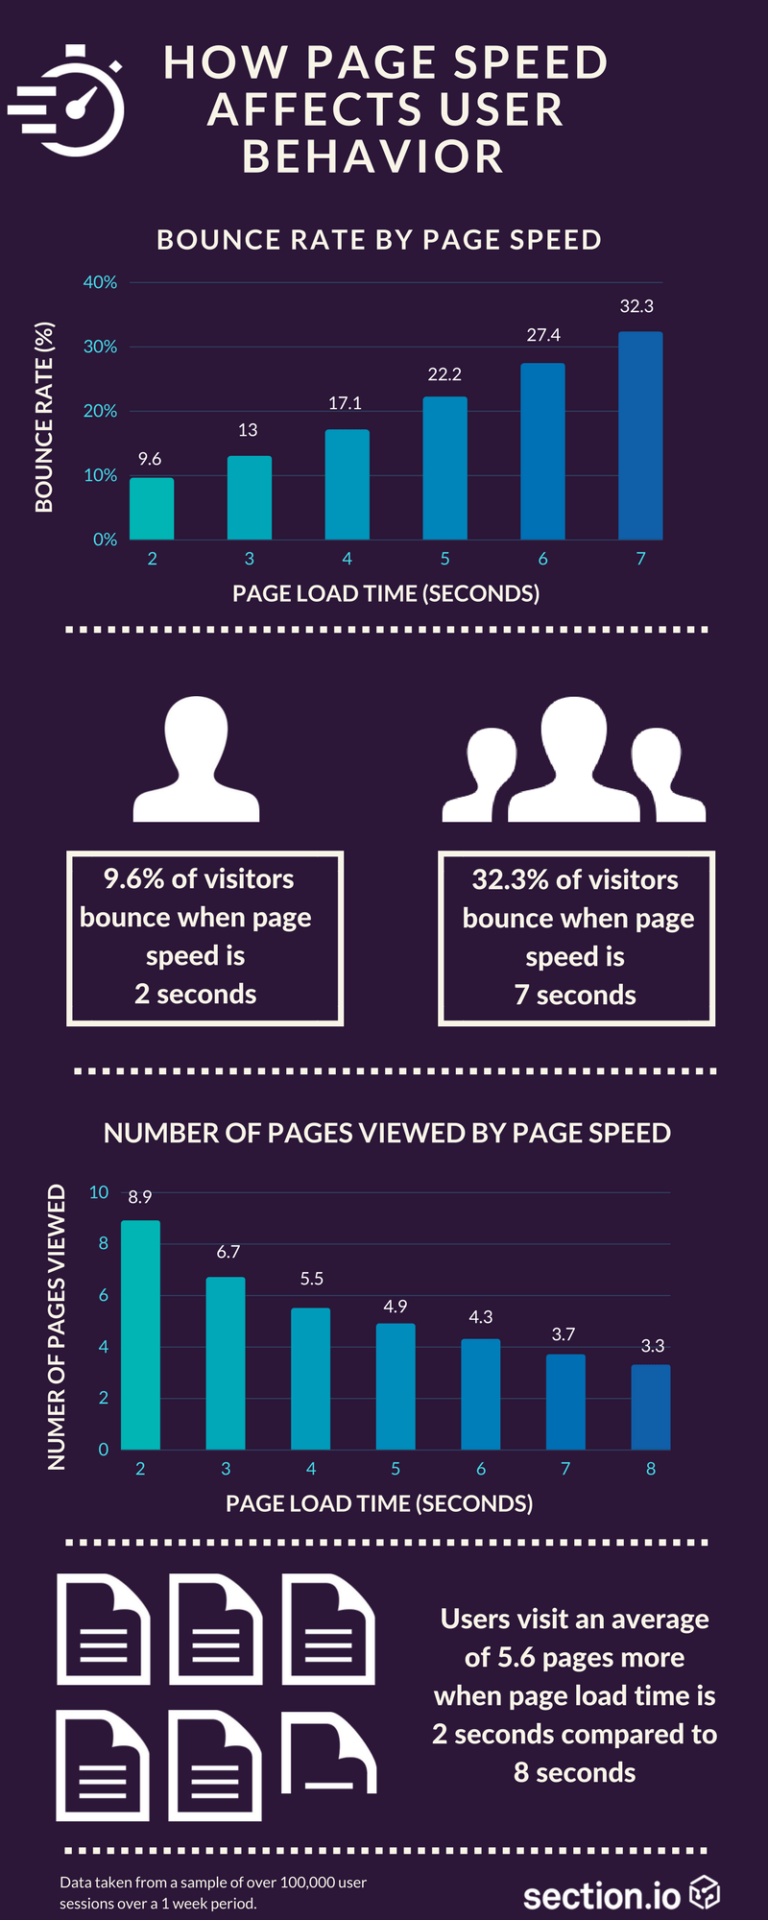 give your website a boost in search - Add infographics